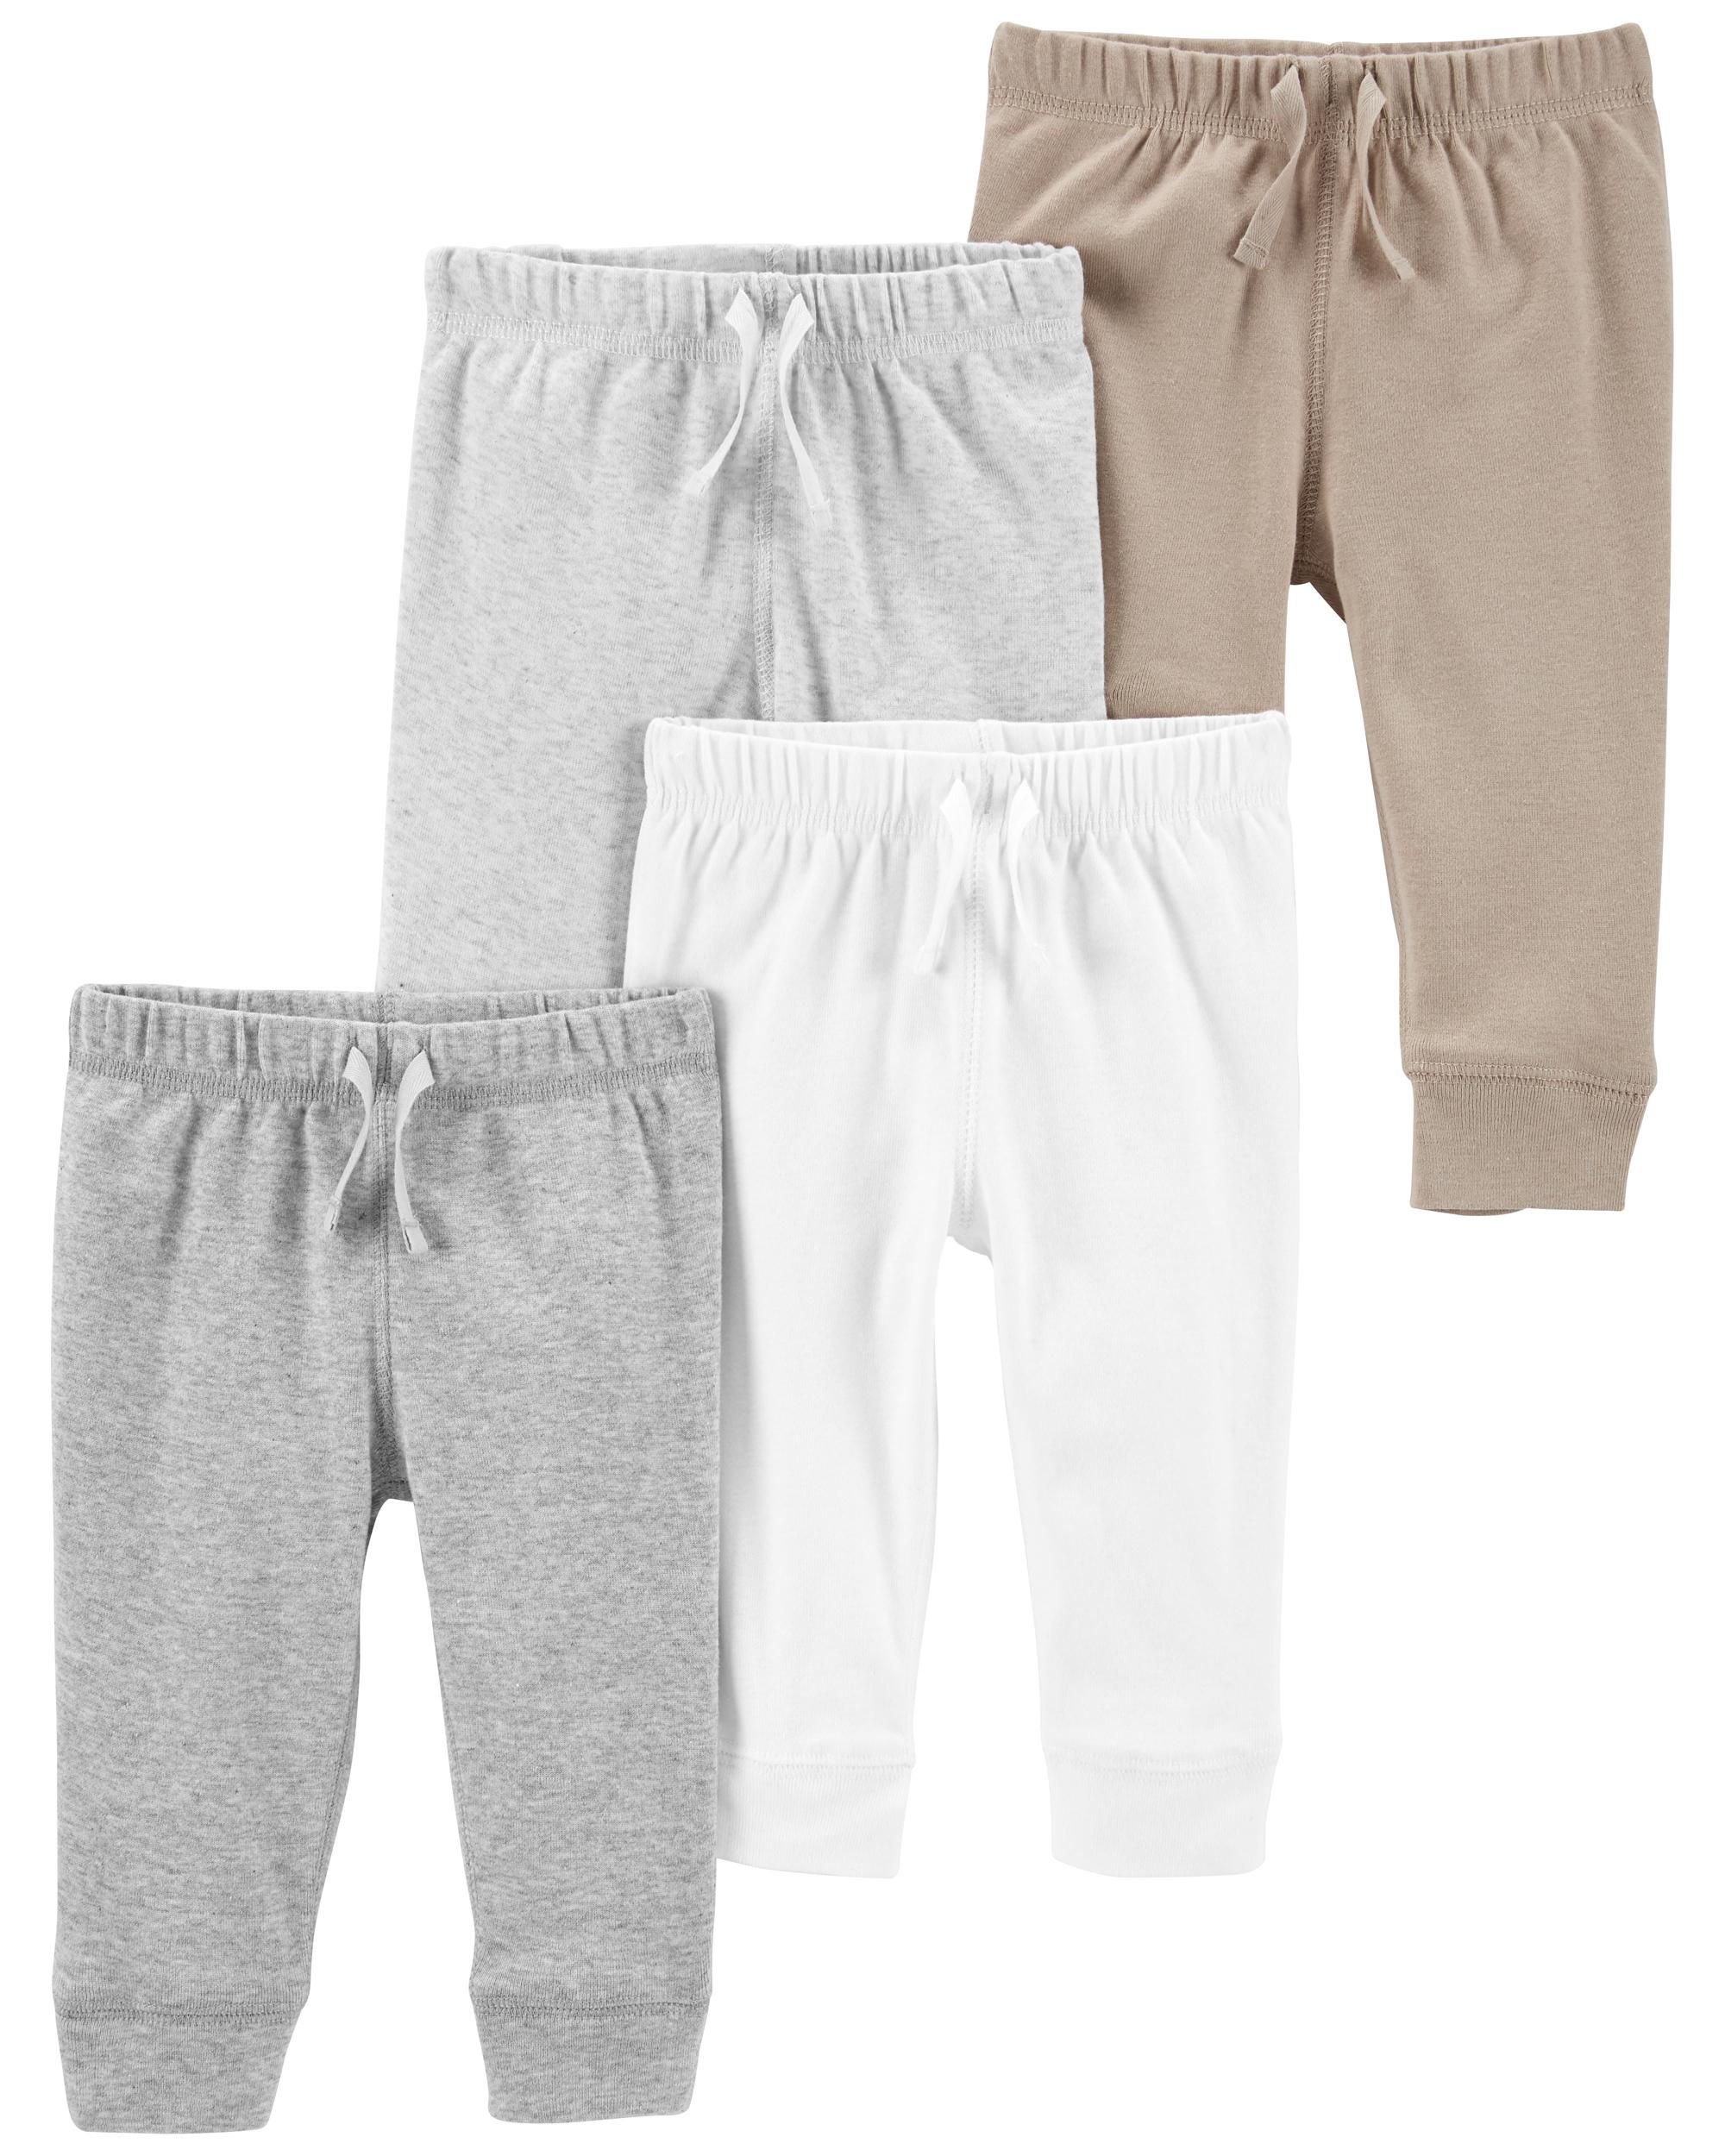 Baby 4-Pack Cotton Pants | Carter's